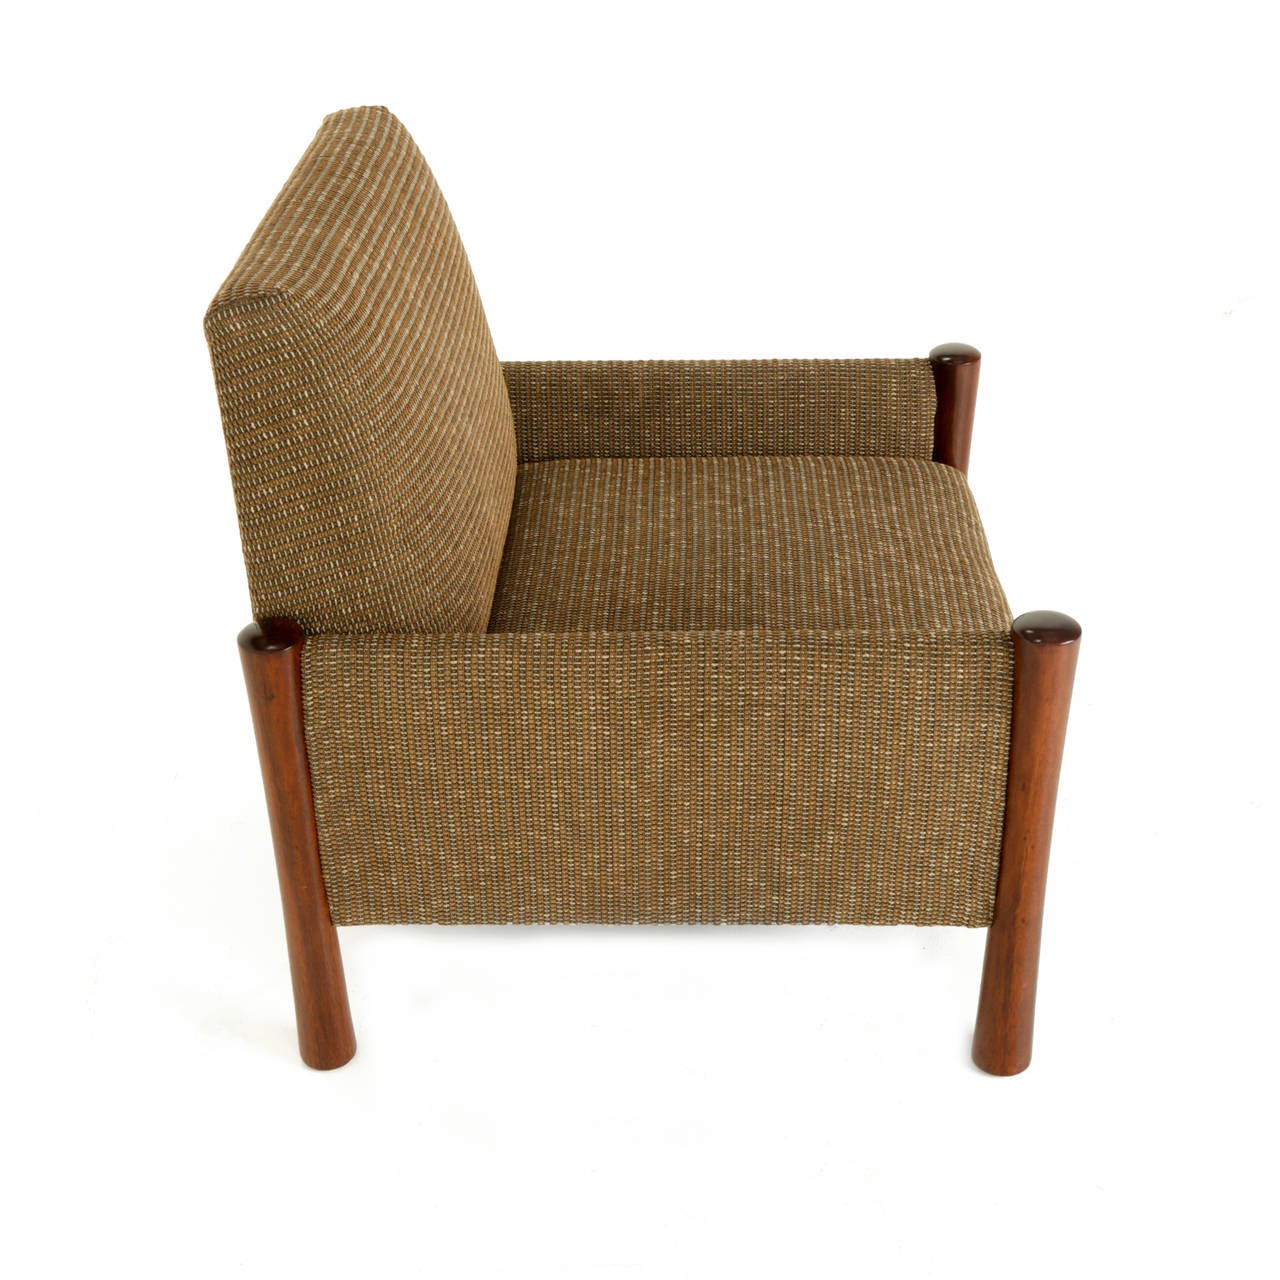 Lacquered Mid-Century Brazilian Sculptural Wood Legs and Tweed Upholstered Arm Club Chair For Sale